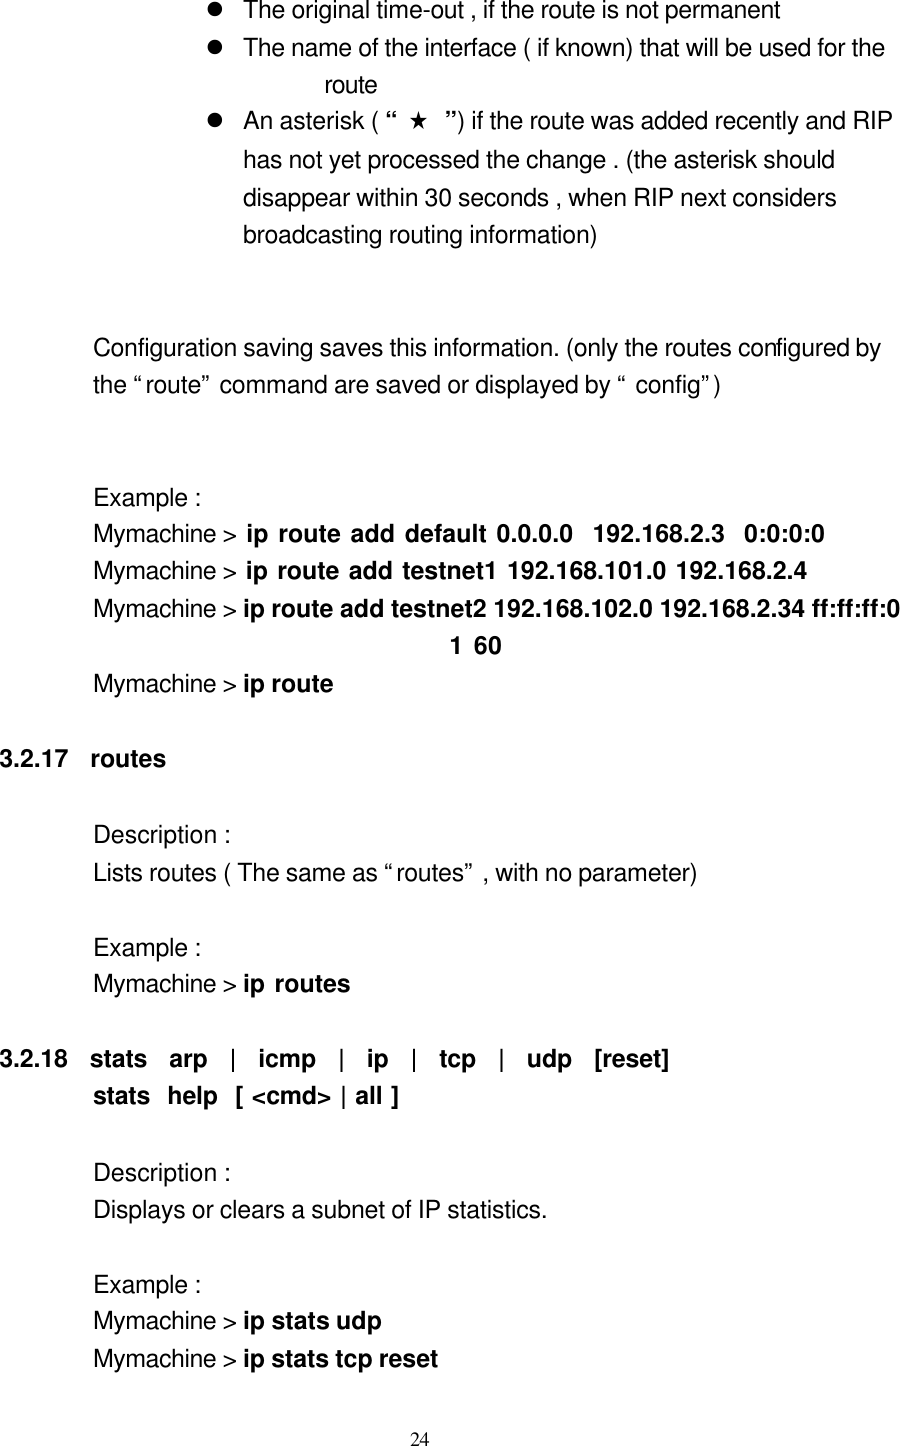  24  l The original time-out , if the route is not permanent l The name of the interface ( if known) that will be used for the route l An asterisk ( “ ★ ”) if the route was added recently and RIP has not yet processed the change . (the asterisk should disappear within 30 seconds , when RIP next considers broadcasting routing information)   Configuration saving saves this information. (only the routes configured by the “route” command are saved or displayed by “ config”)                    Example : Mymachine &gt; ip route add default 0.0.0.0  192.168.2.3  0:0:0:0          Mymachine &gt; ip route add testnet1 192.168.101.0 192.168.2.4           Mymachine &gt; ip route add testnet2 192.168.102.0 192.168.2.34 ff:ff:ff:0 1 60               Mymachine &gt; ip route            3.2.17  routes                Description : Lists routes ( The same as “routes” , with no parameter)      Example :   Mymachine &gt; ip routes    3.2.18  stats  arp  |  icmp  |  ip  |  tcp  |  udp  [reset]                   stats  help  [ &lt;cmd&gt; | all ]                    Description :   Displays or clears a subnet of IP statistics.                    Example :   Mymachine &gt; ip stats udp                            Mymachine &gt; ip stats tcp reset 